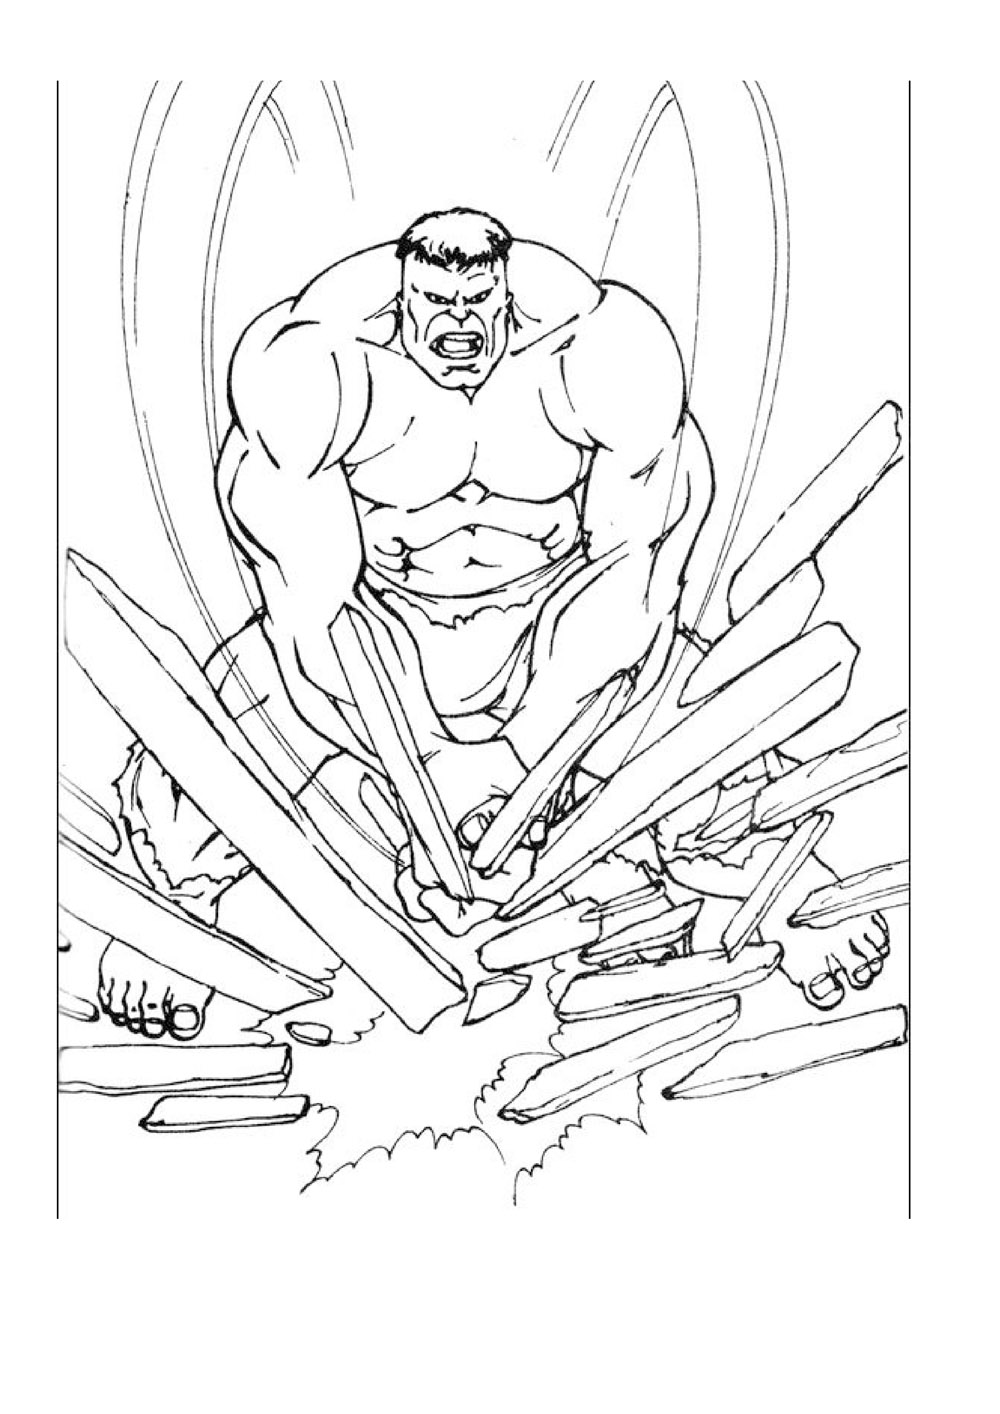 Avengers #74124 (Superheroes) – Printable coloring pages